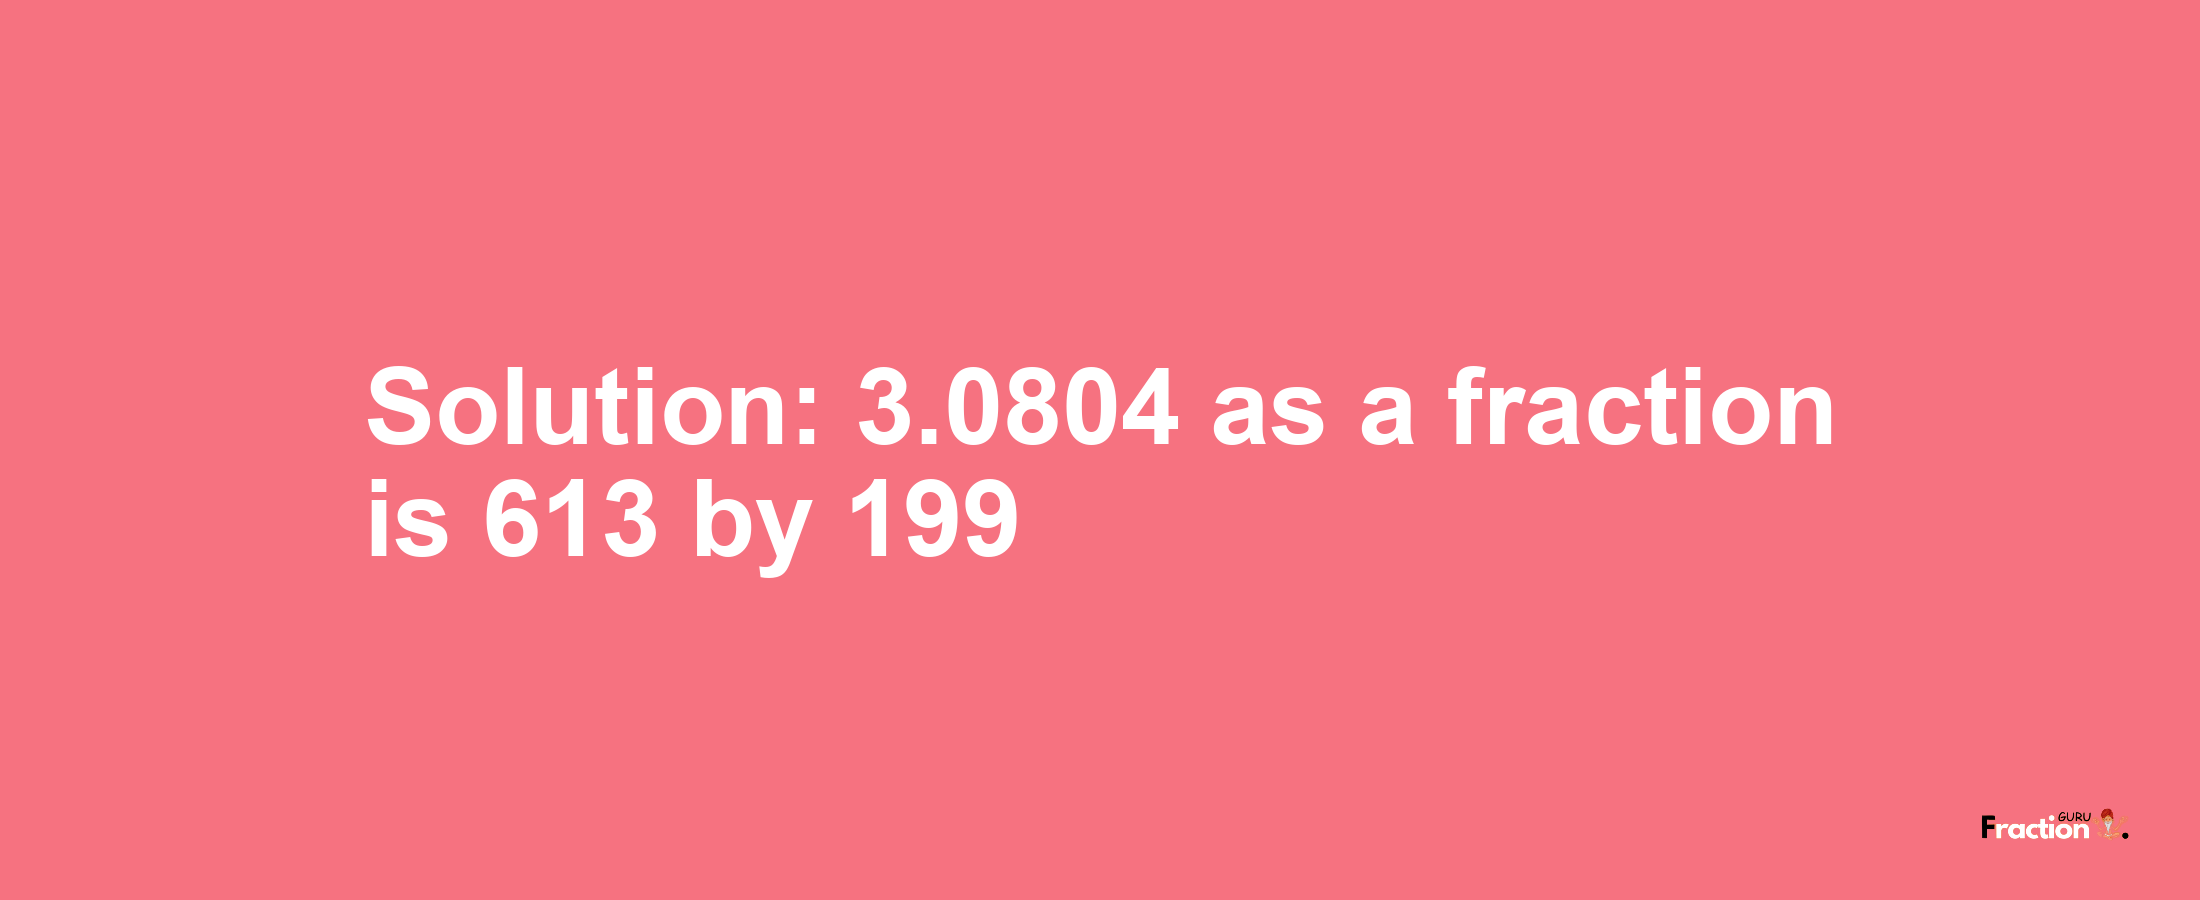 Solution:3.0804 as a fraction is 613/199